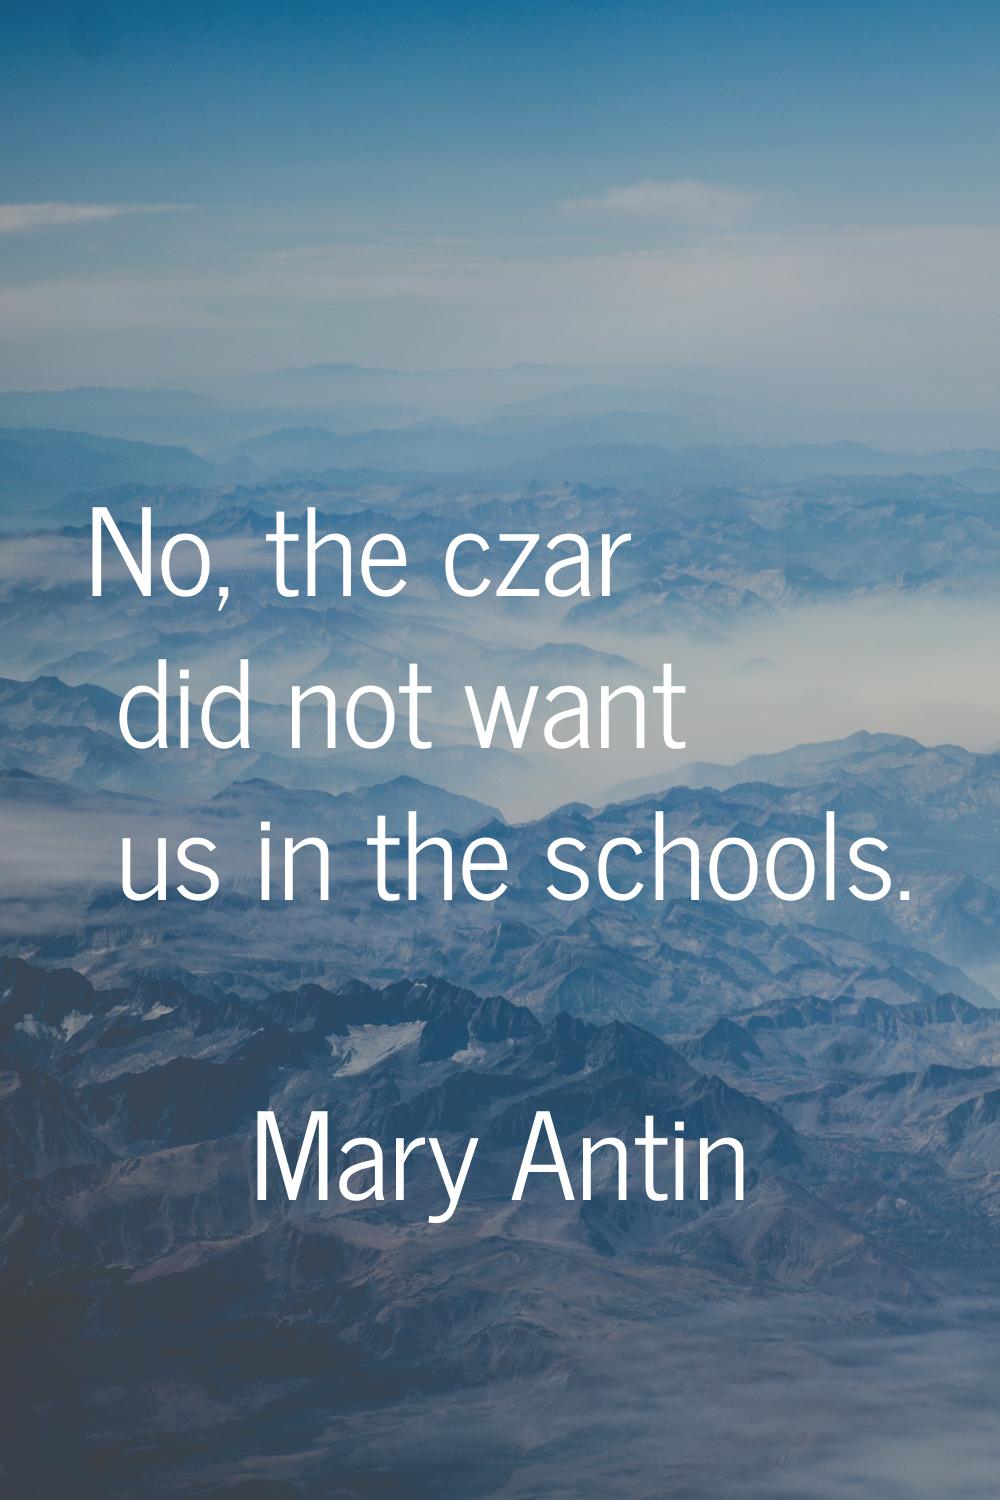 No, the czar did not want us in the schools.